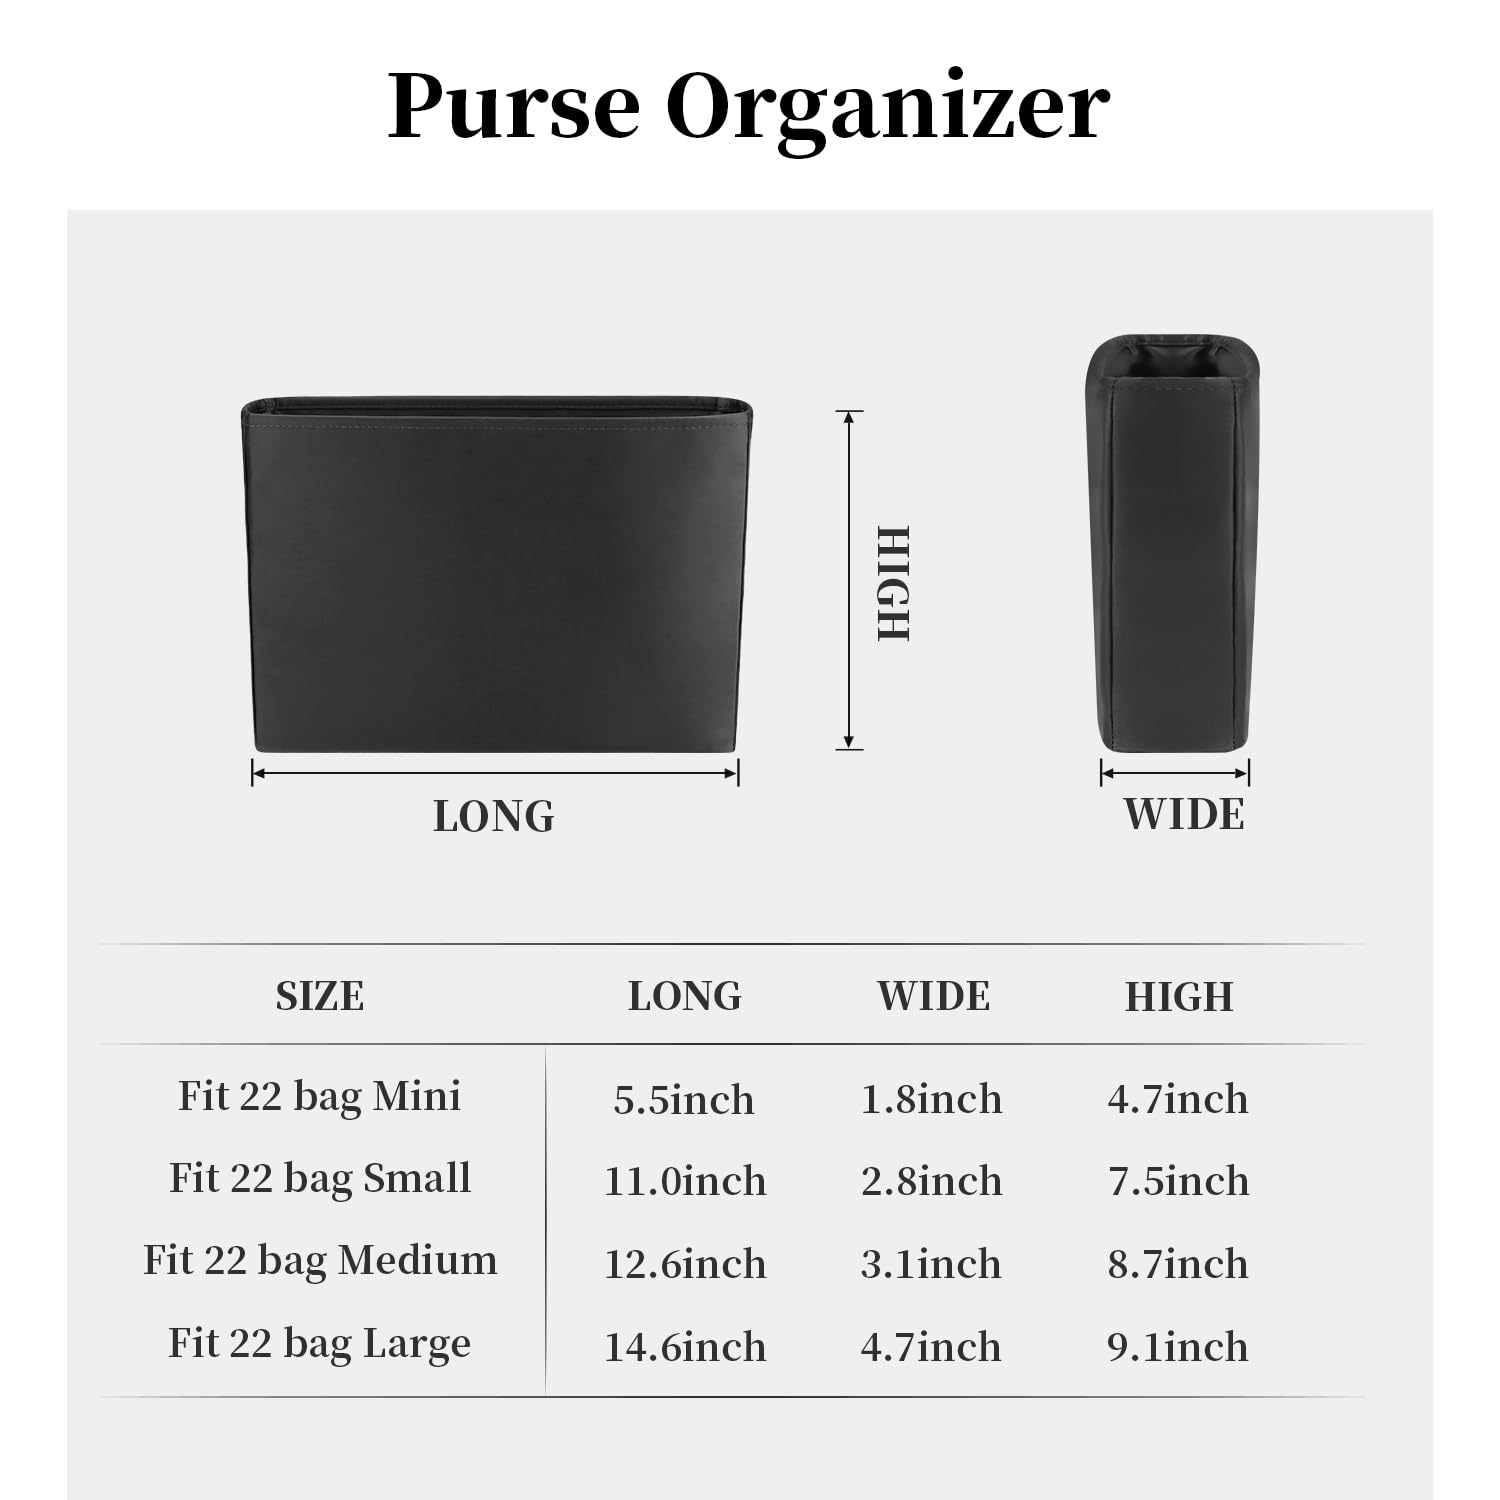 KINGS IN BAG Organizer for Tote Bags/Purse Bags Organizer with Silky Satin Fit for Chanel 22 Bag Mini/Small/Medium/Large Lightweight Shaper for Daily Use, 6 Pockets Capacity (Black, Chanel 22 Small)